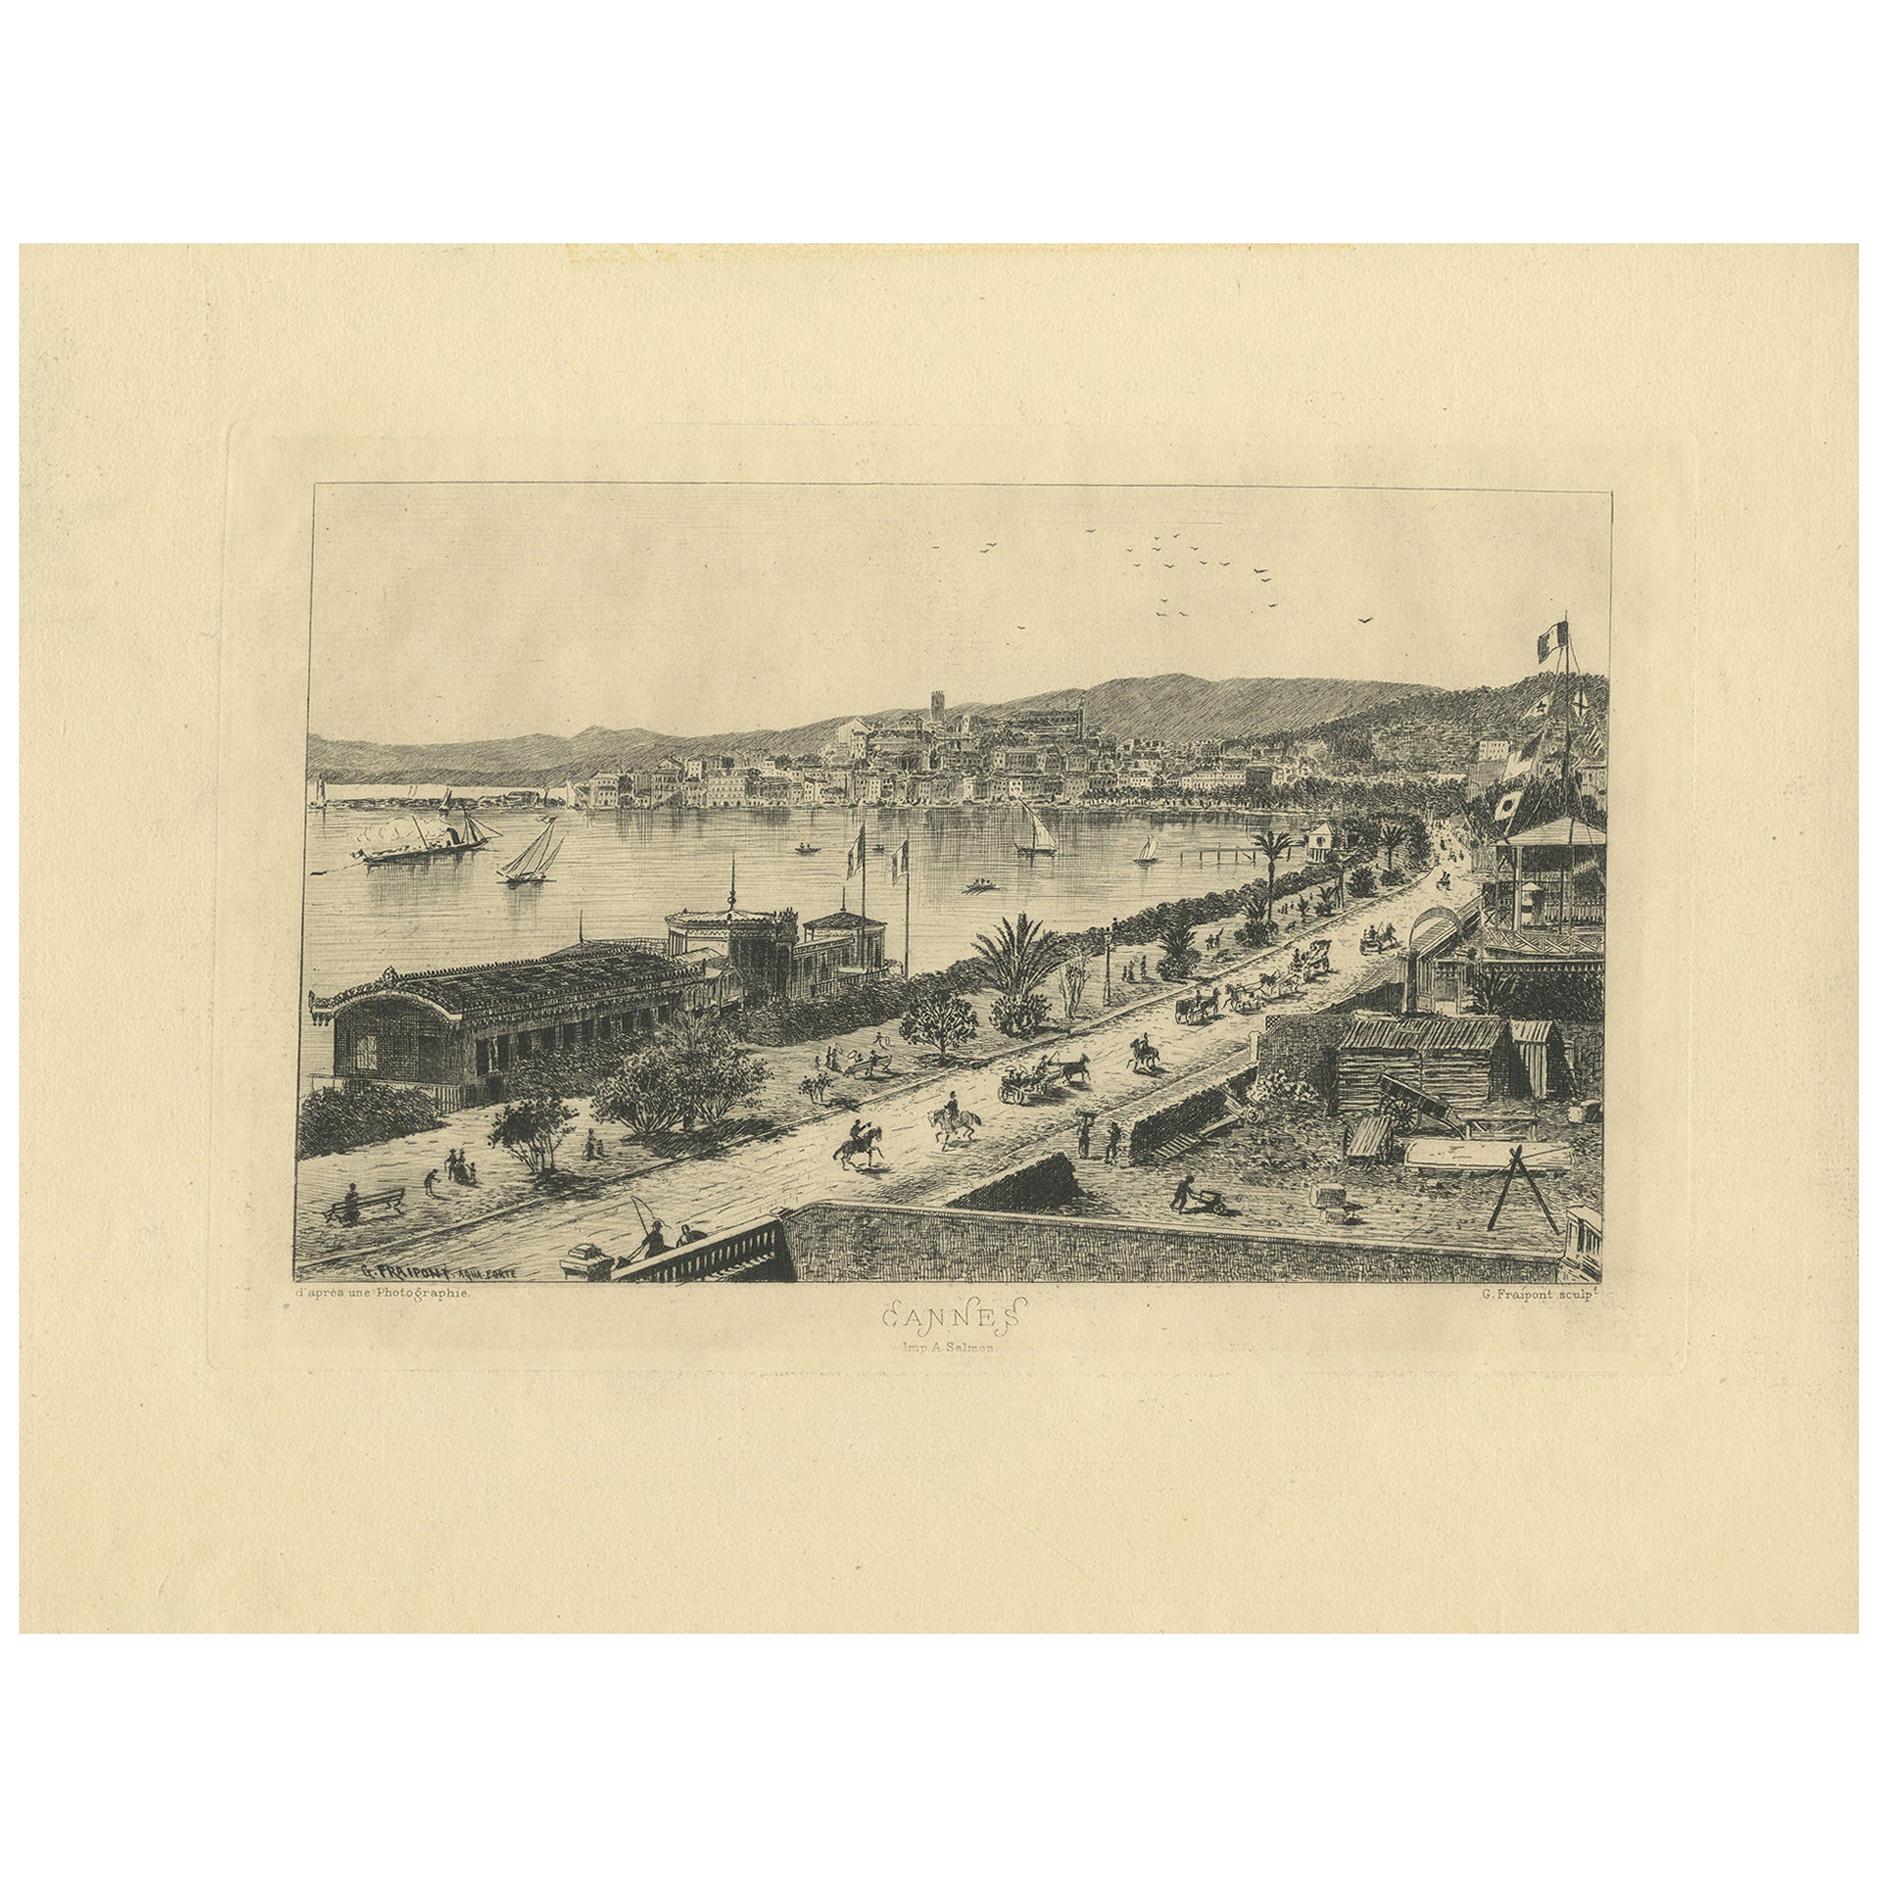 Antique Print of the City of Cannes by Fraipont, circa 1900